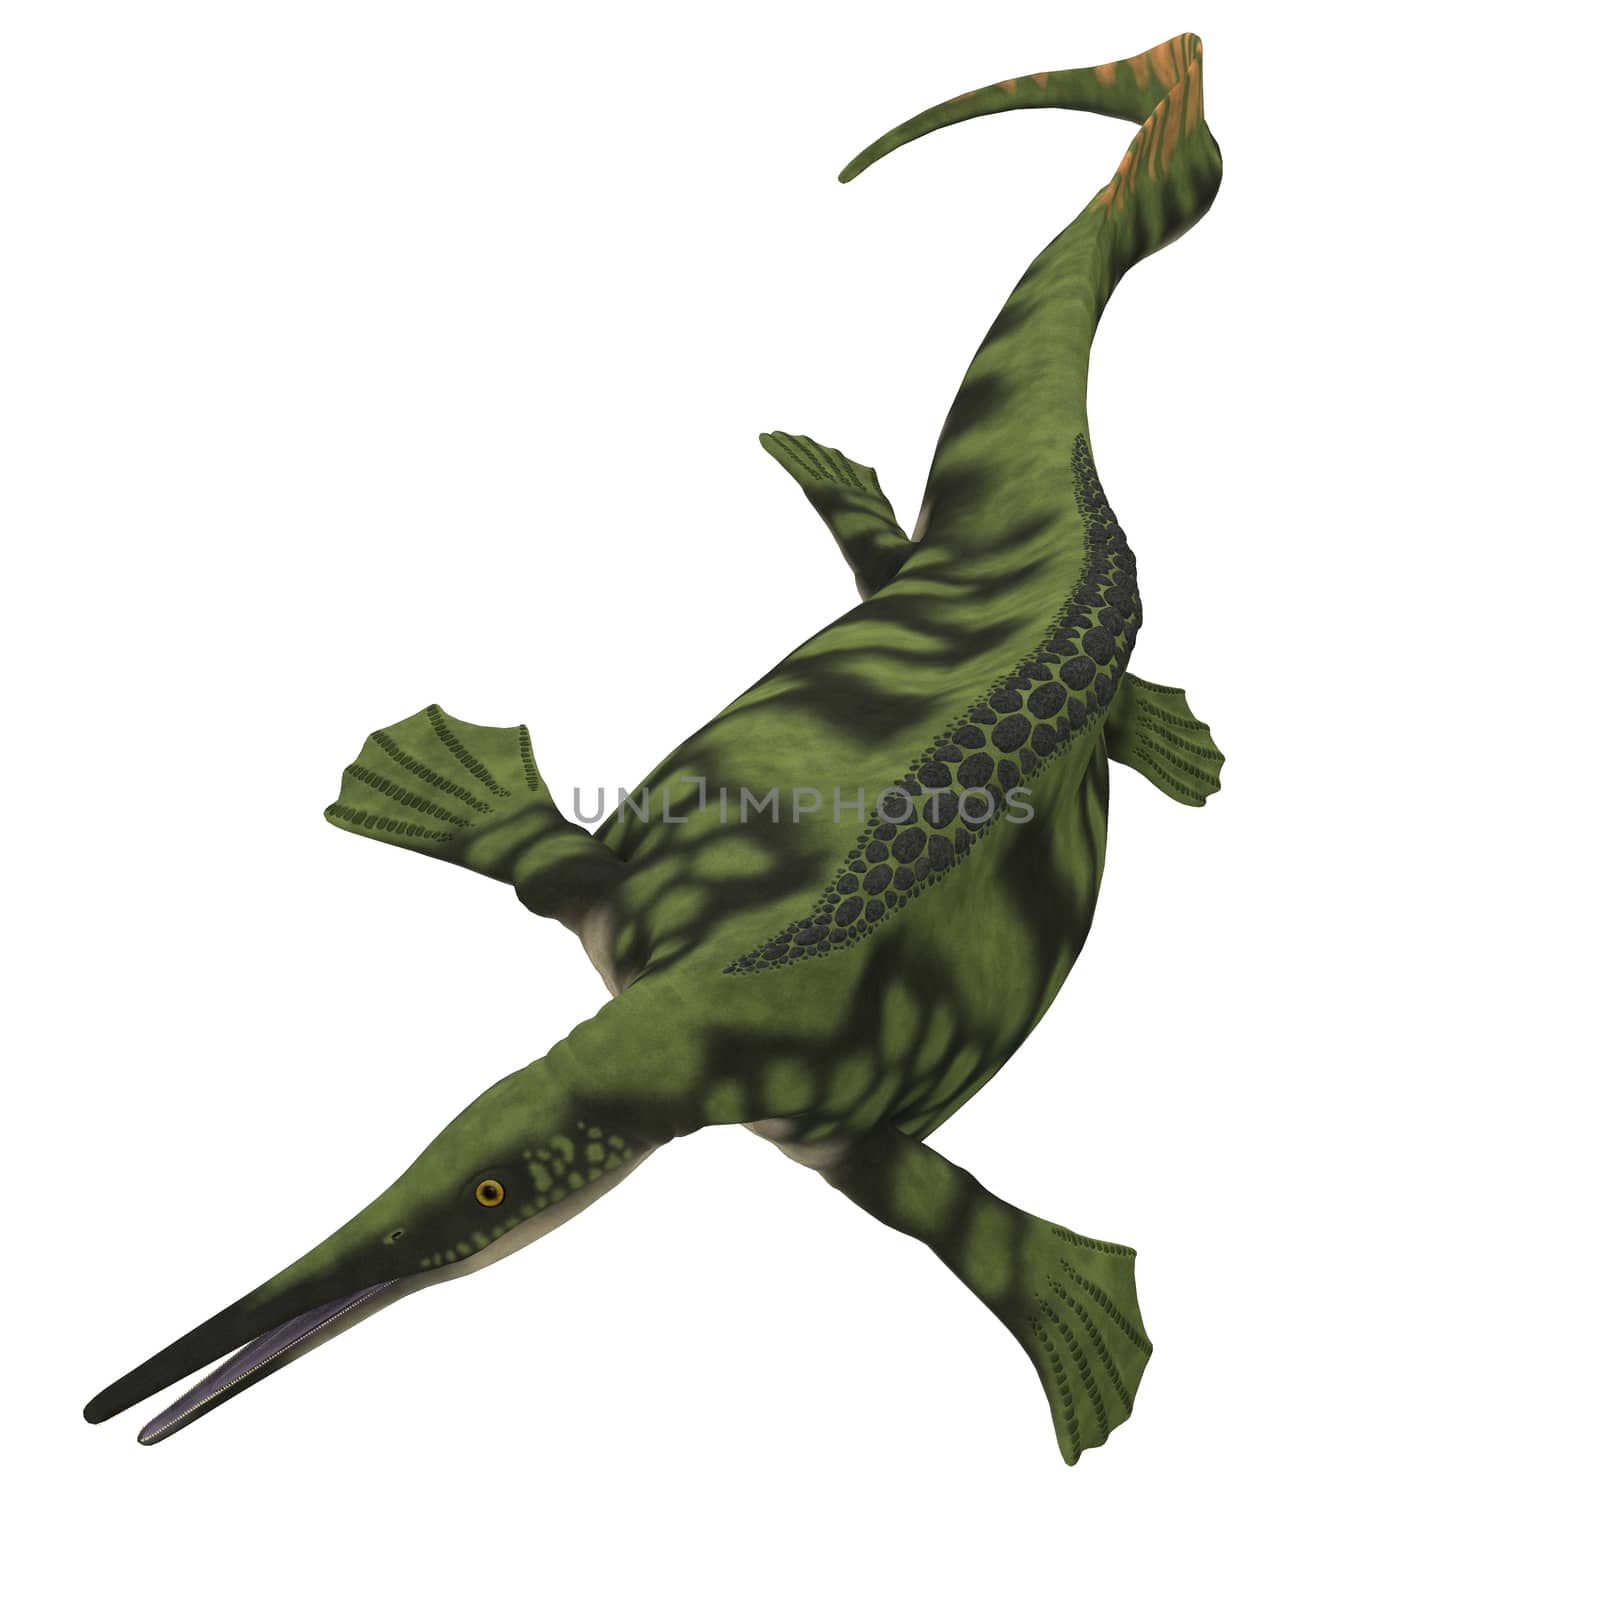 Hepehsuchus was a predatory marine Ichthyosaur that lived in the oceans of the Mesozoic Era.